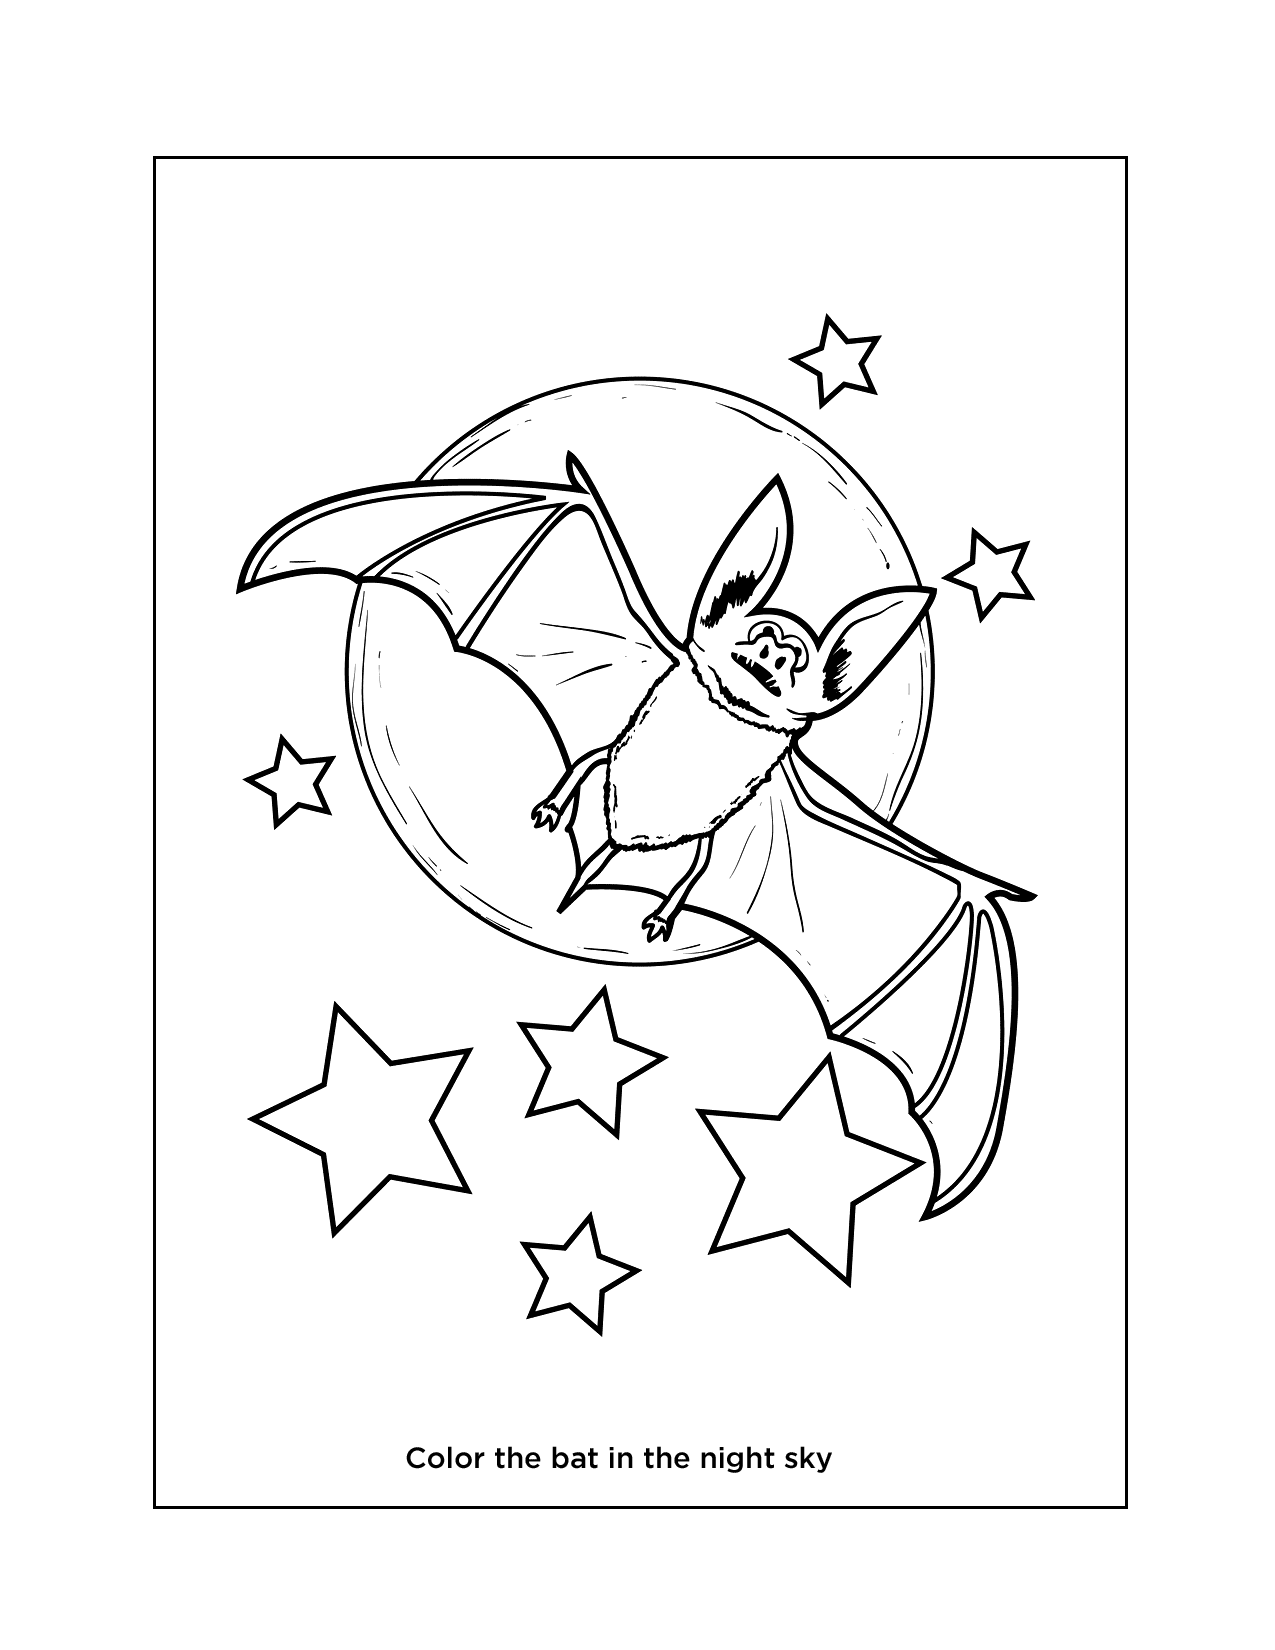 Bat In The Night Sky Coloring Page